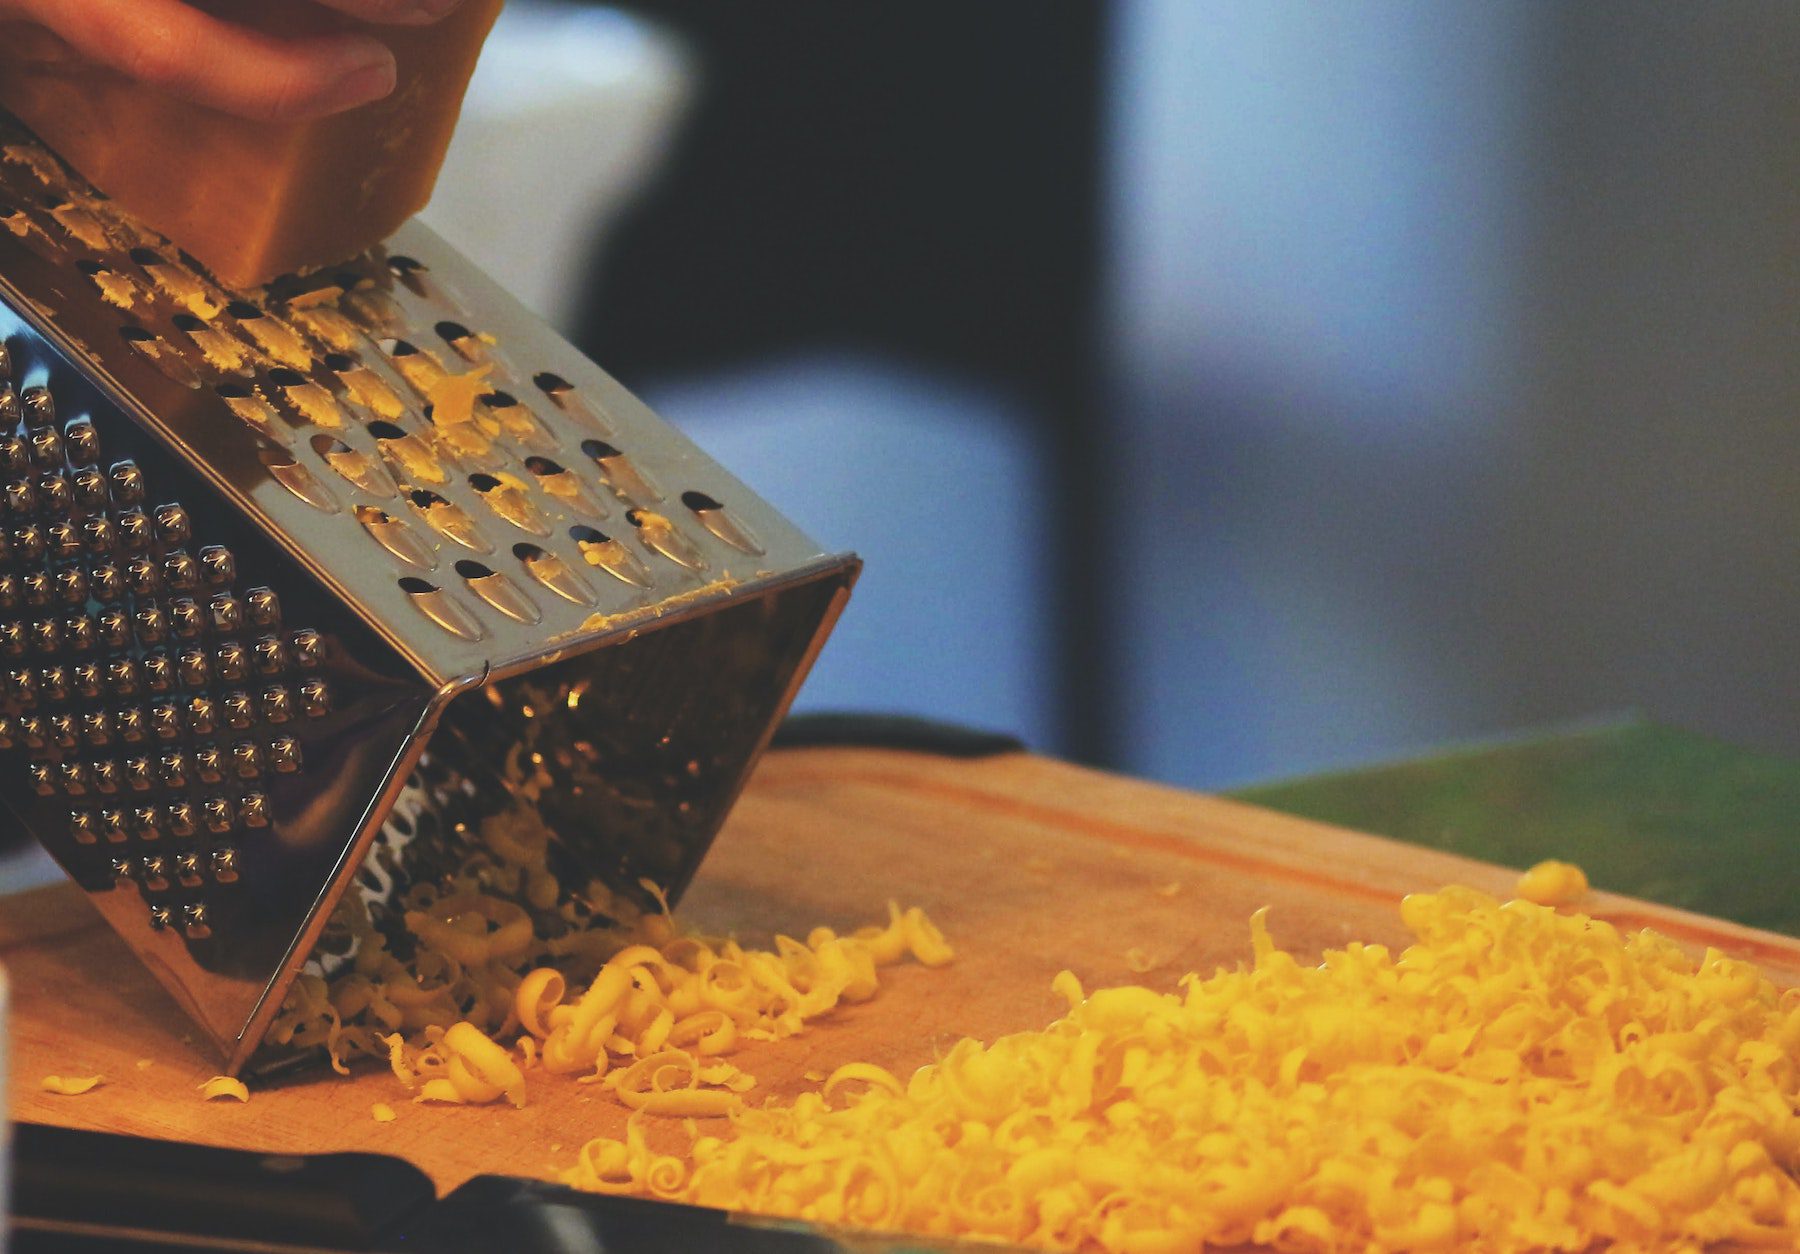 Unseen person grating cheese onto a cutting board. 